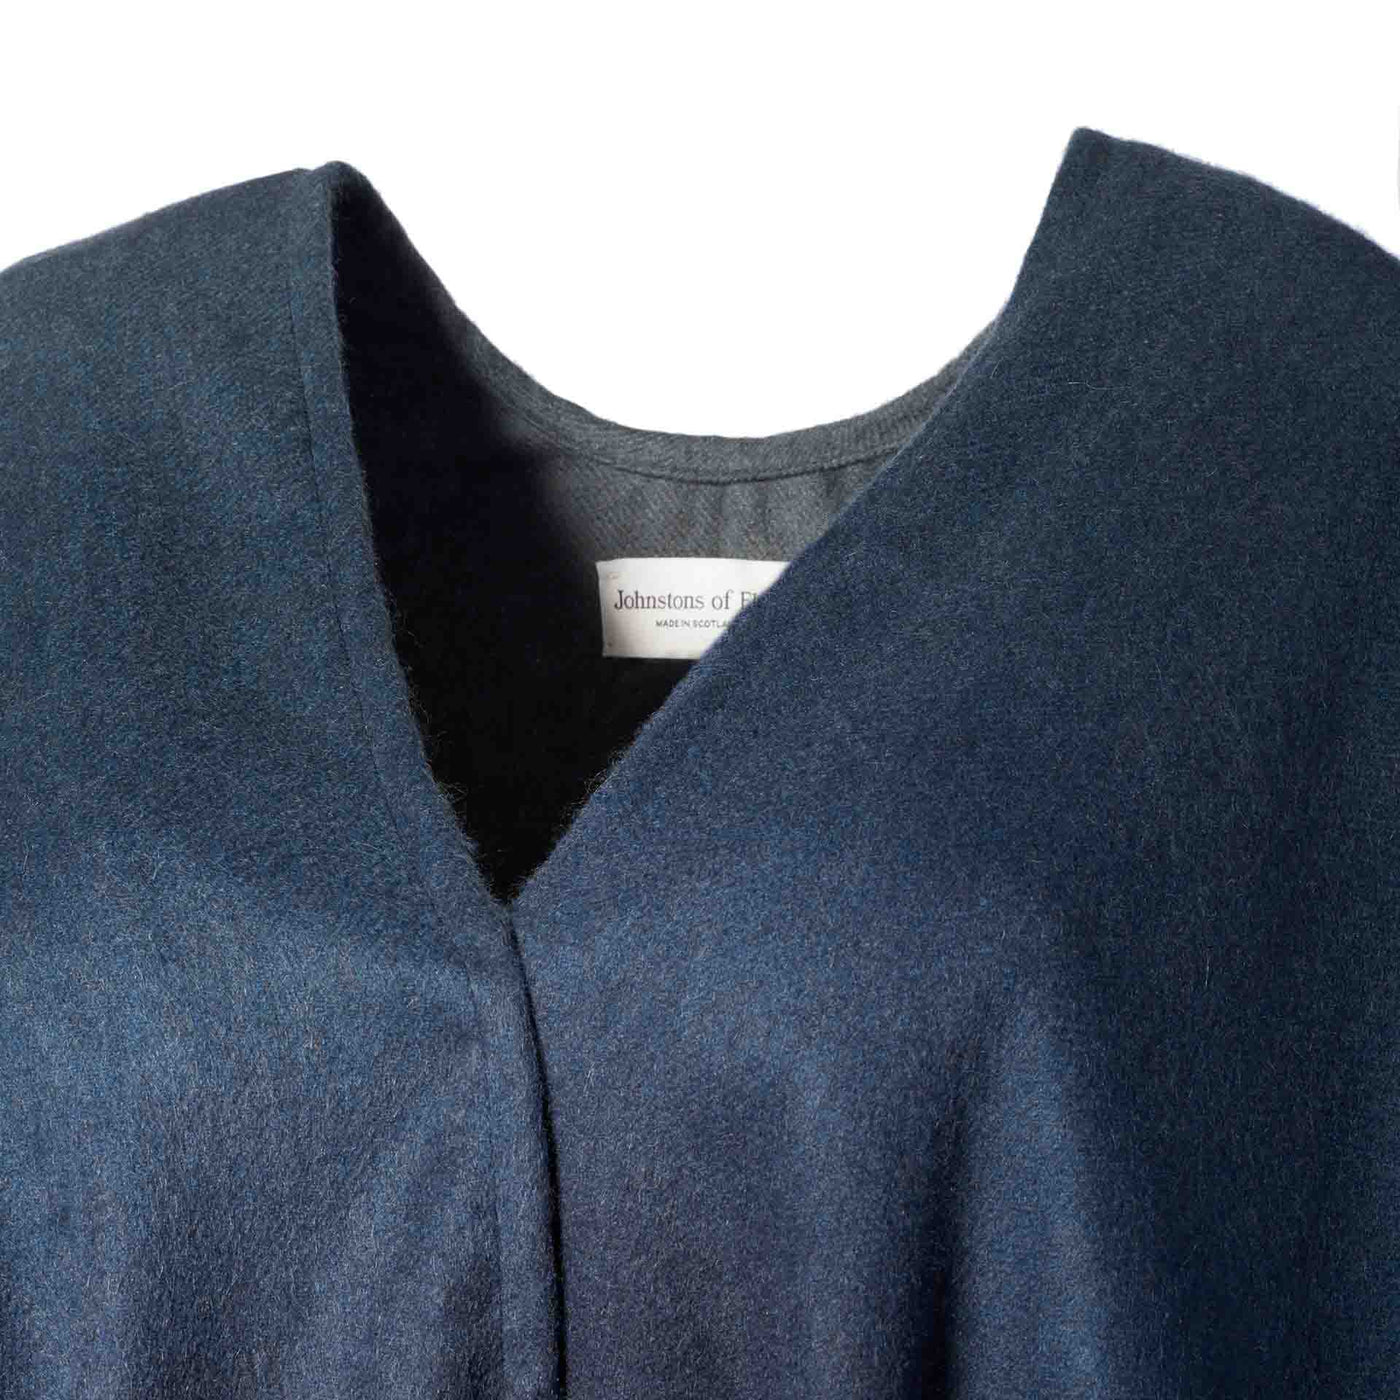 100% Cashmere Woven Cape - Black and Navy